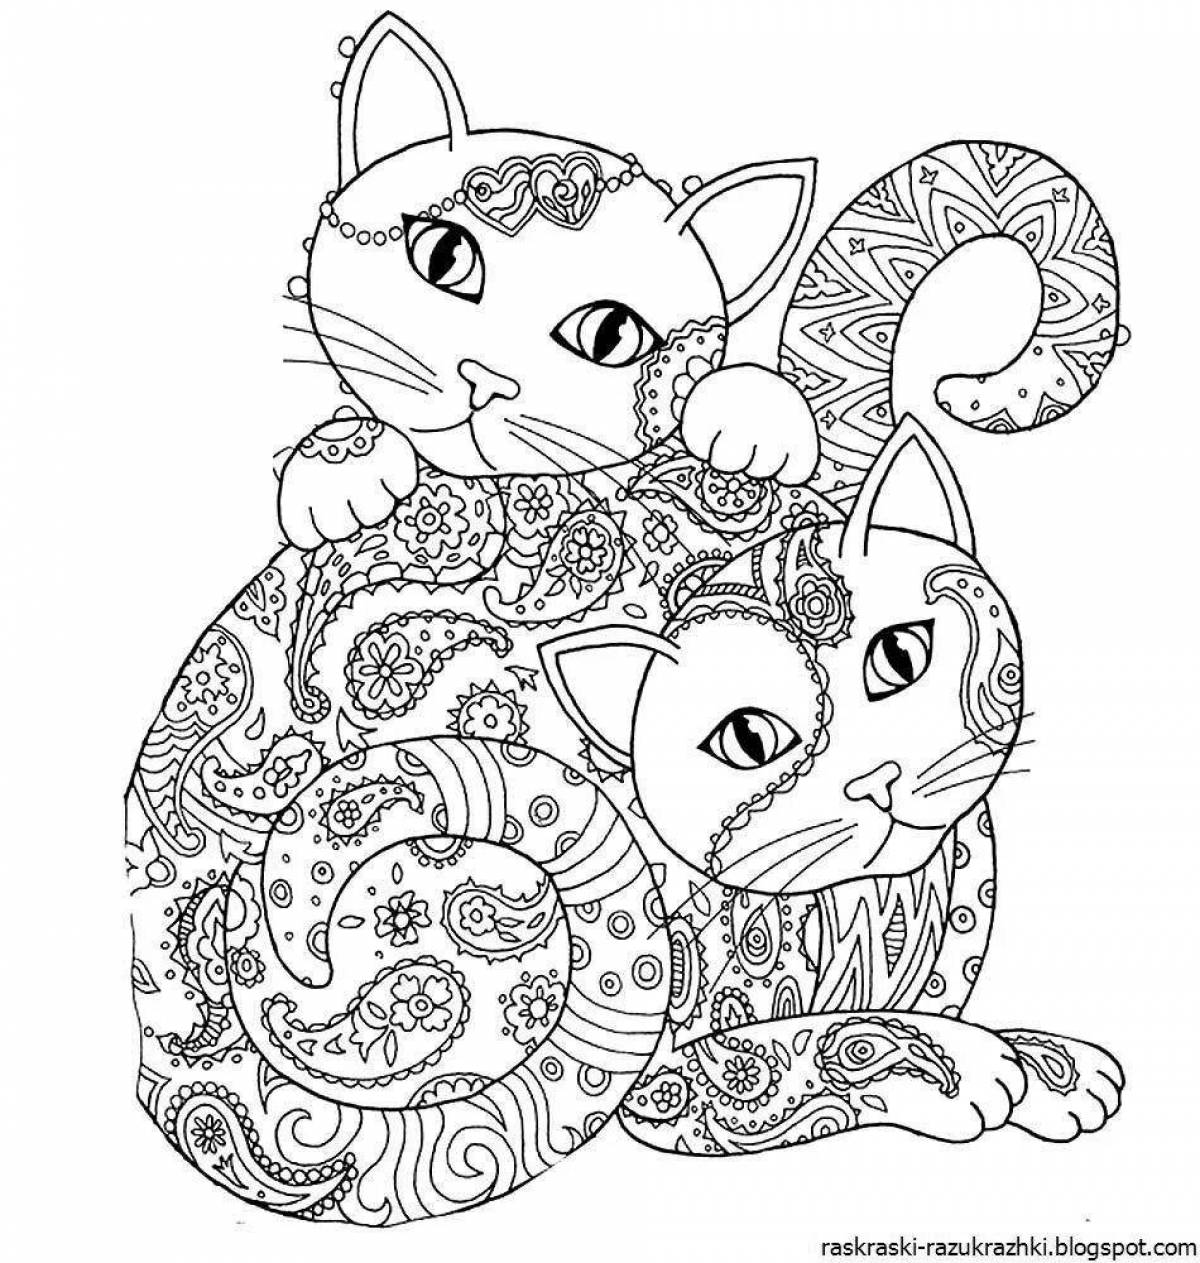 Adorable anti-stress cat coloring book for girls